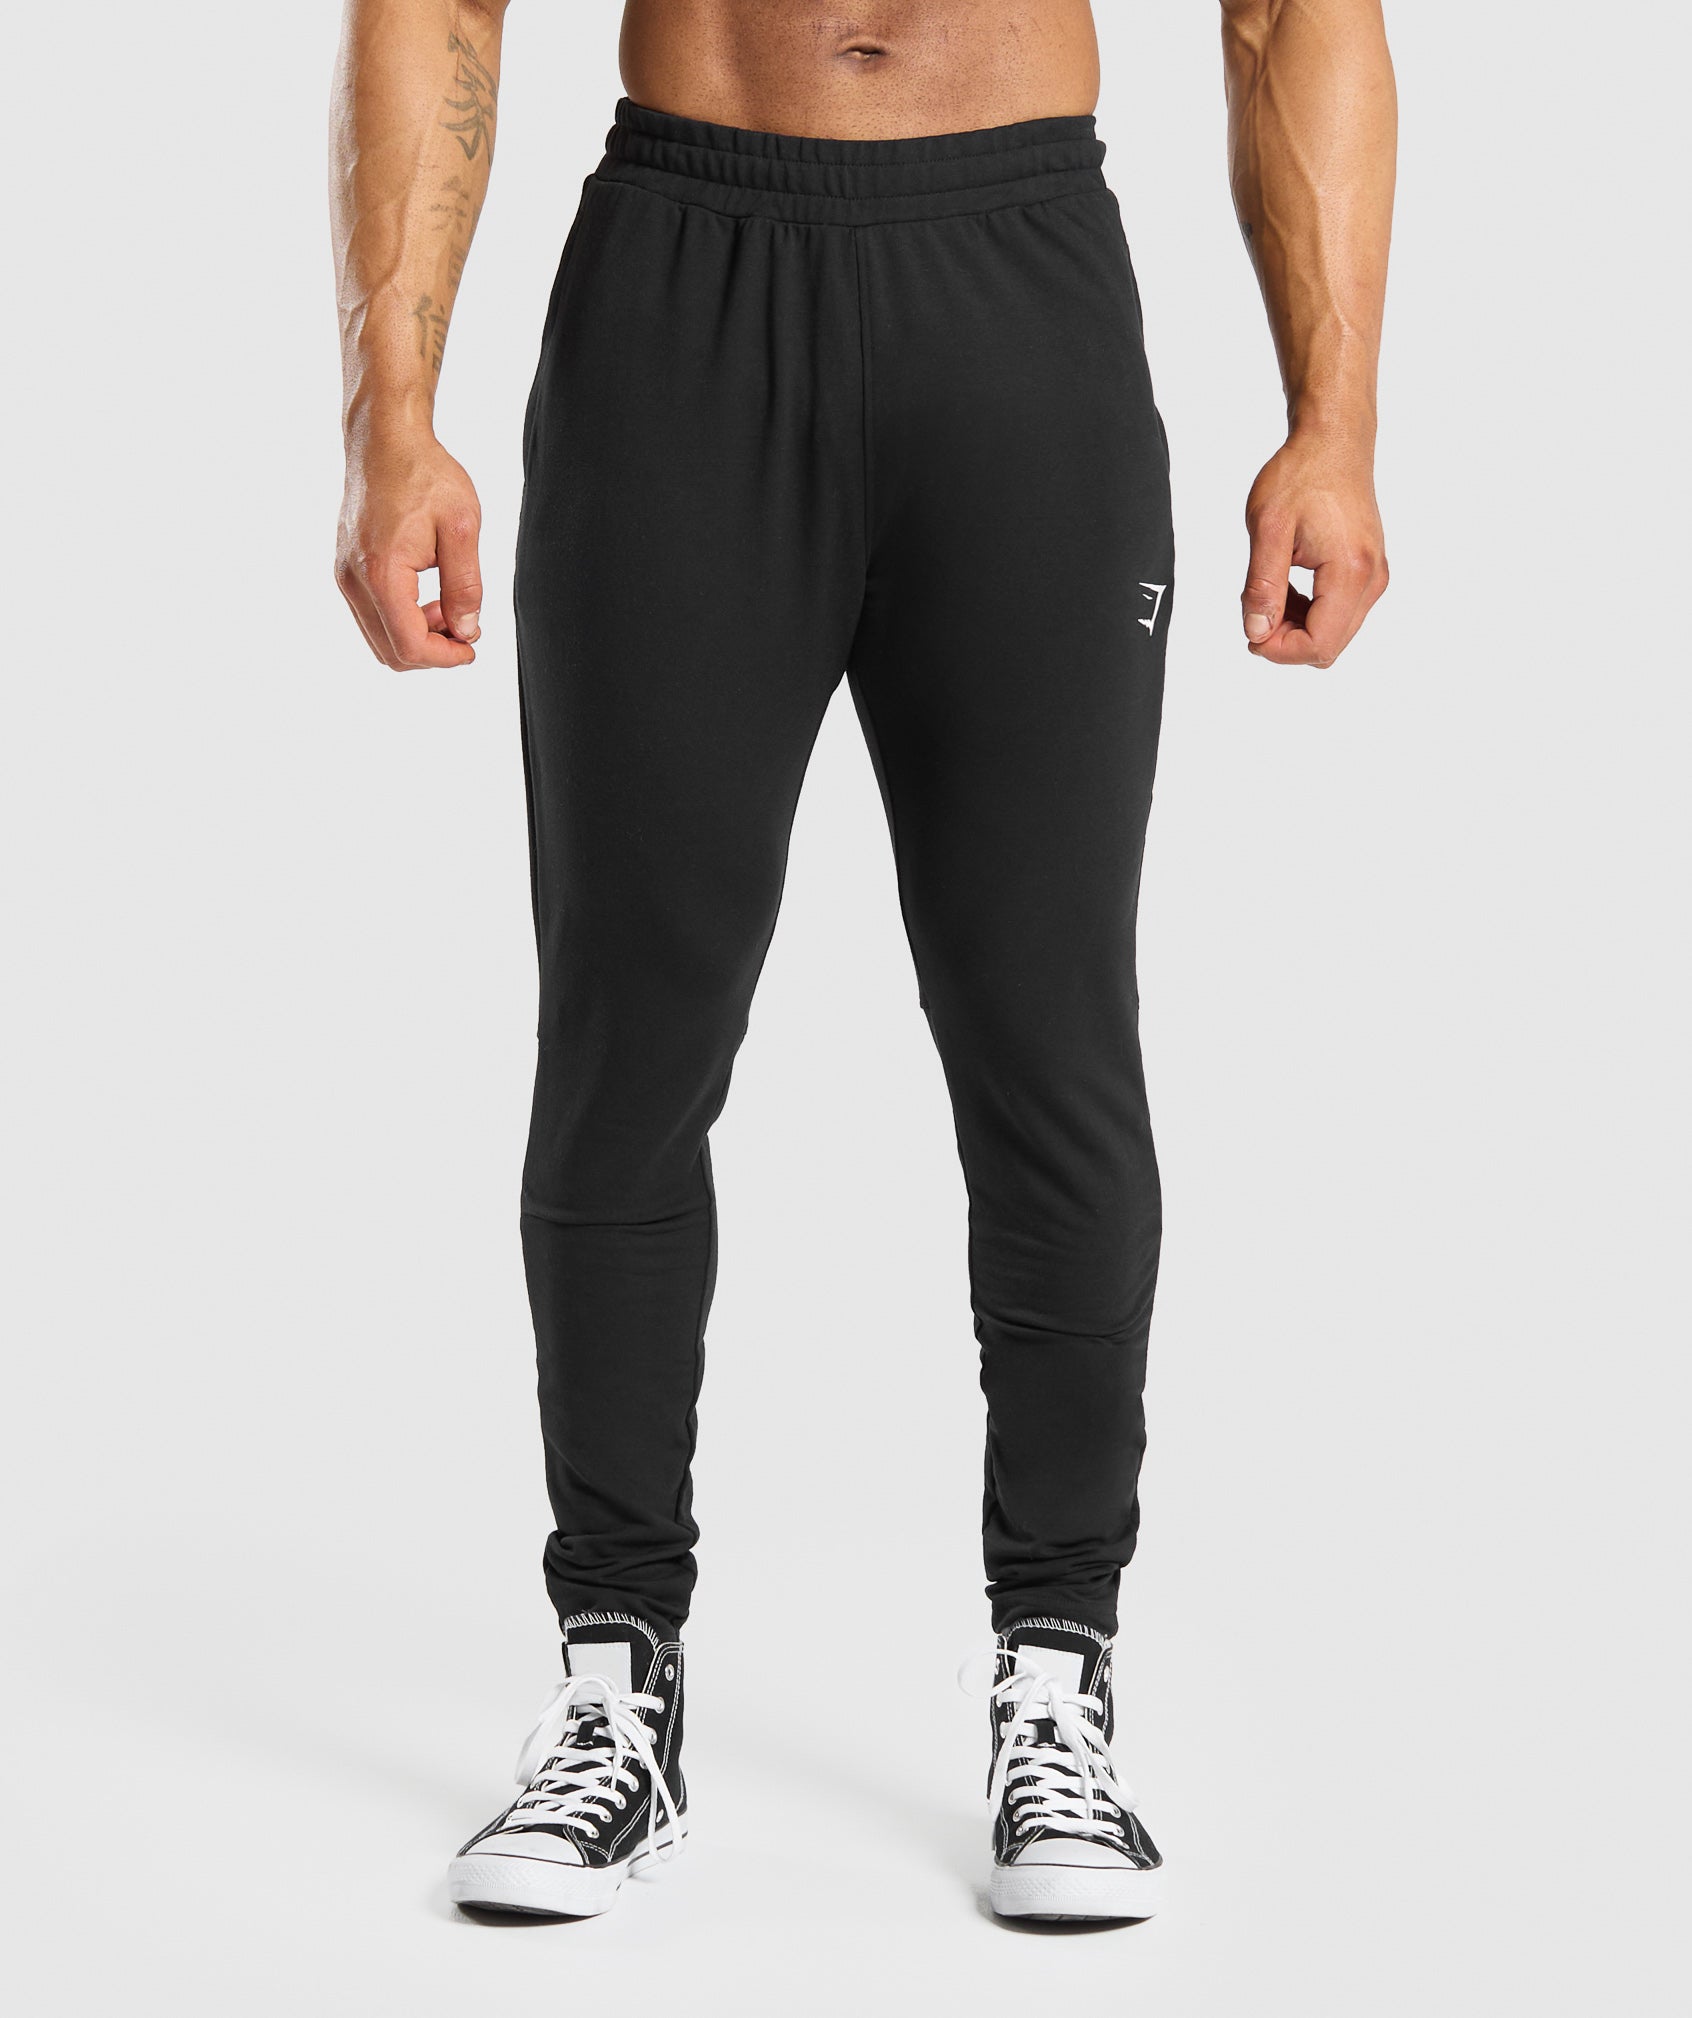 Essential Muscle Joggers